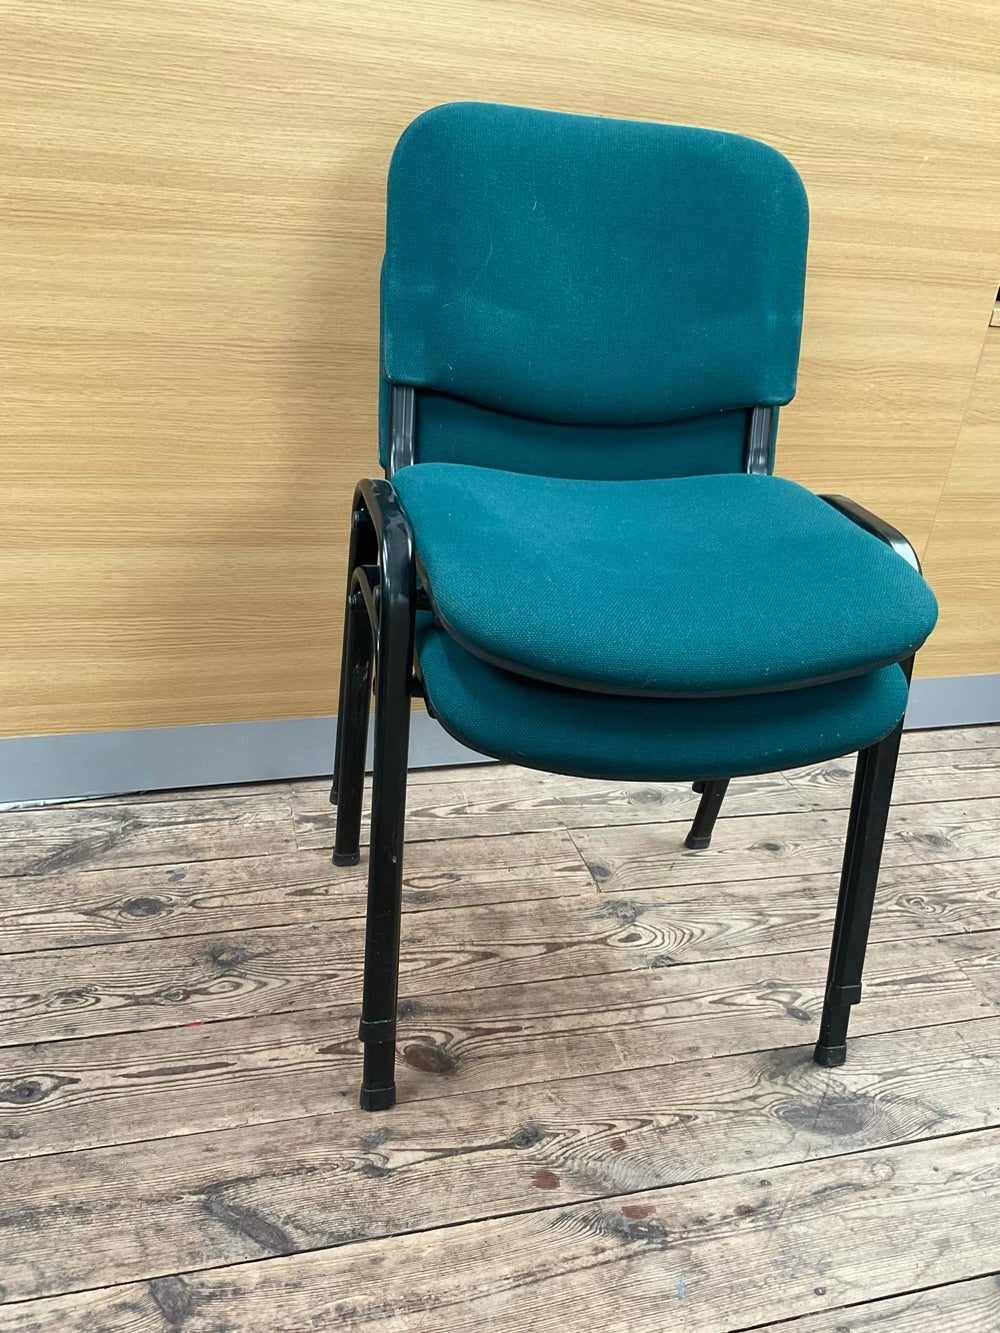 Green Upholstered Stacking Chair